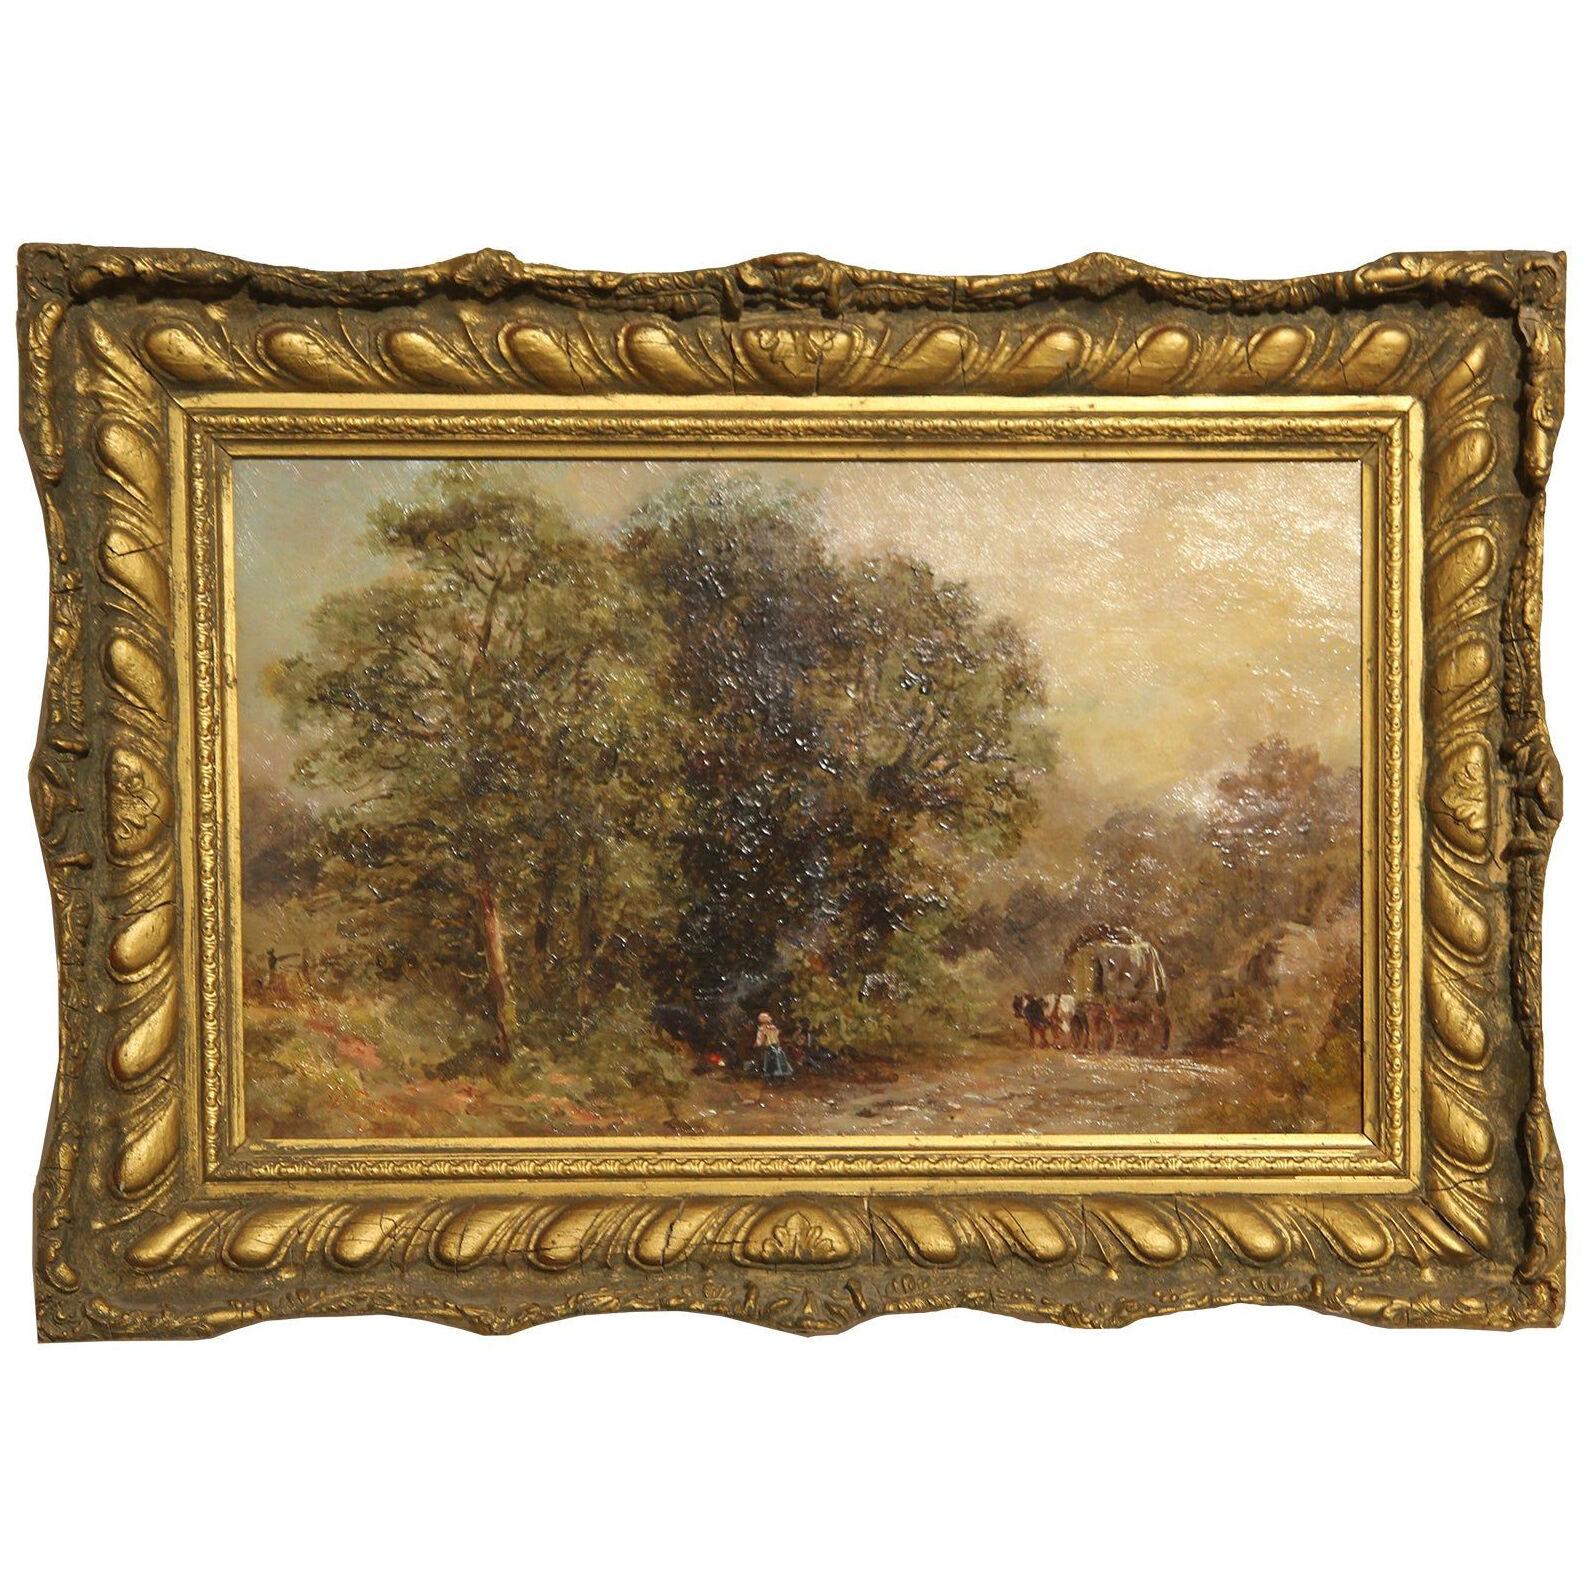 “Gypsies in the New Forest" Earth Toned Romantic Landscape Painting	